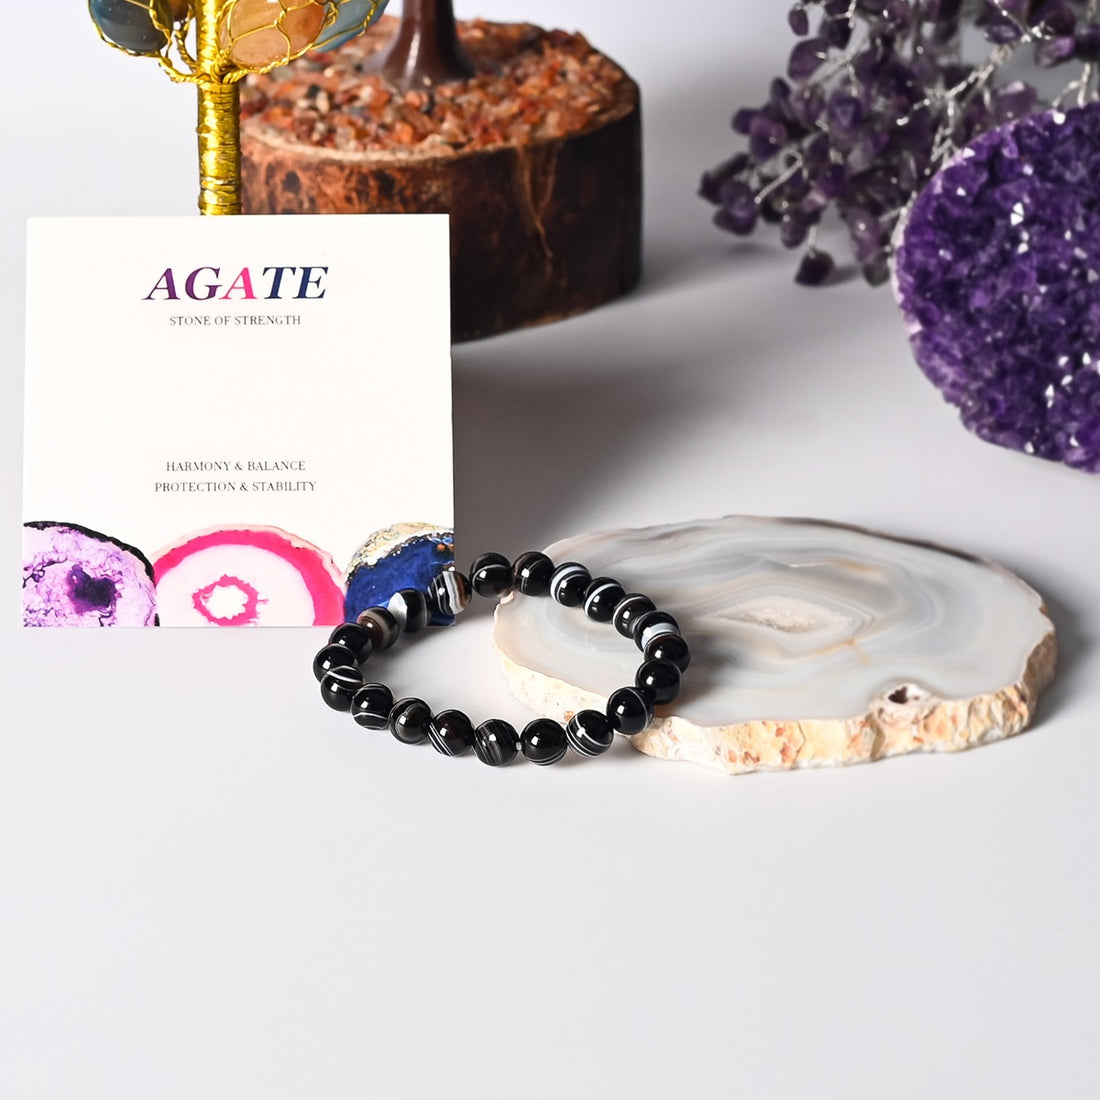 Stylish Black Banded Agate 8mm Round Beads Stretch Bracelet adorning the wrist, a fashionable accessory for strength and grounding